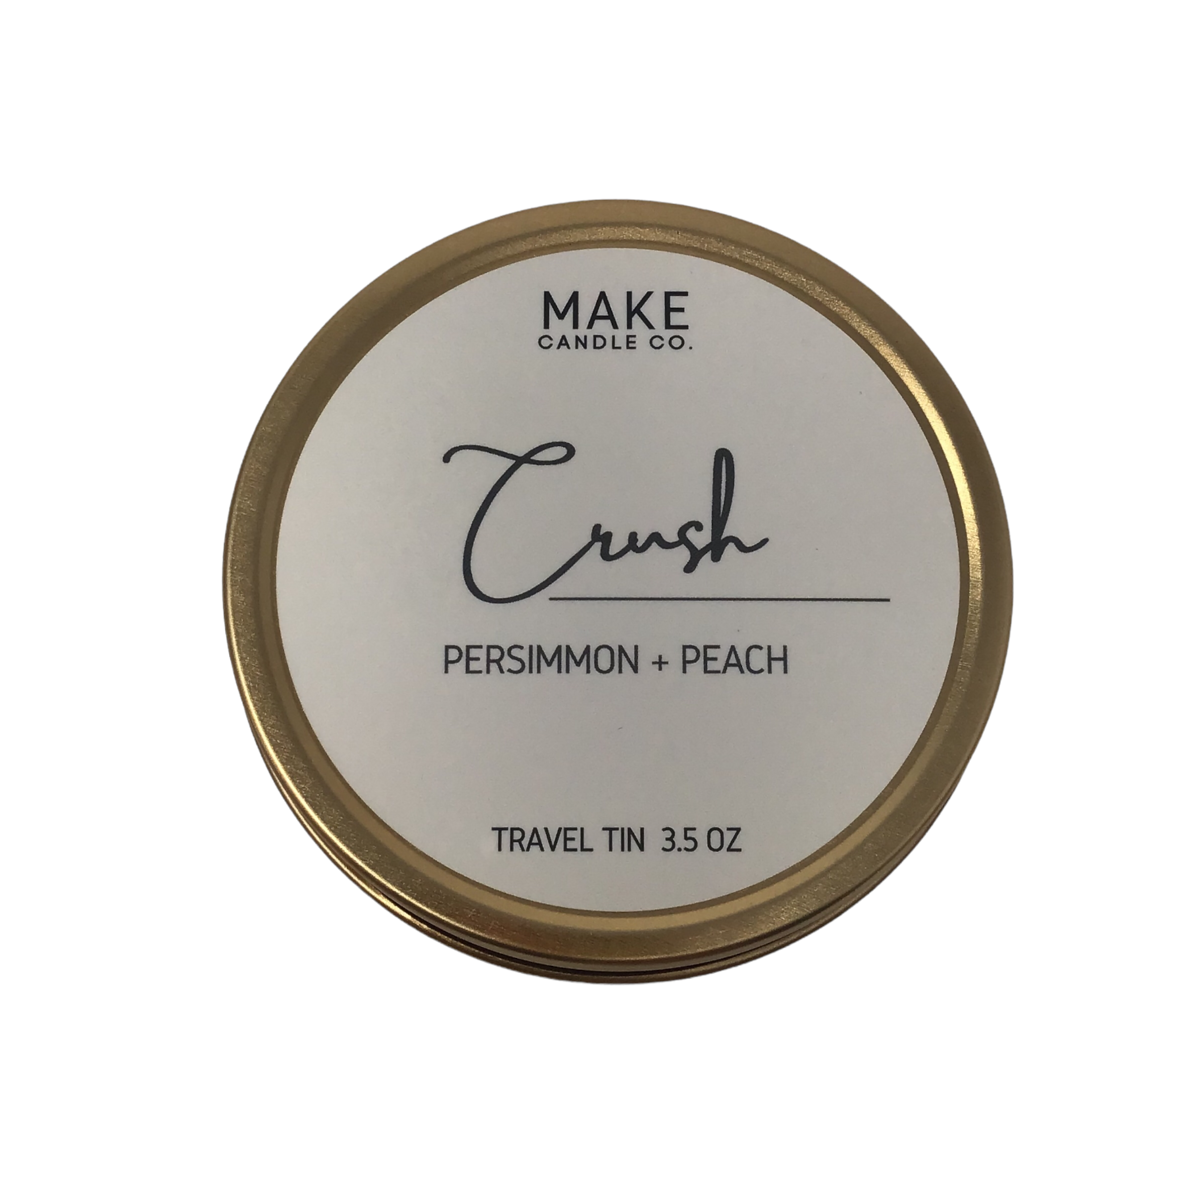 Crush scented candle